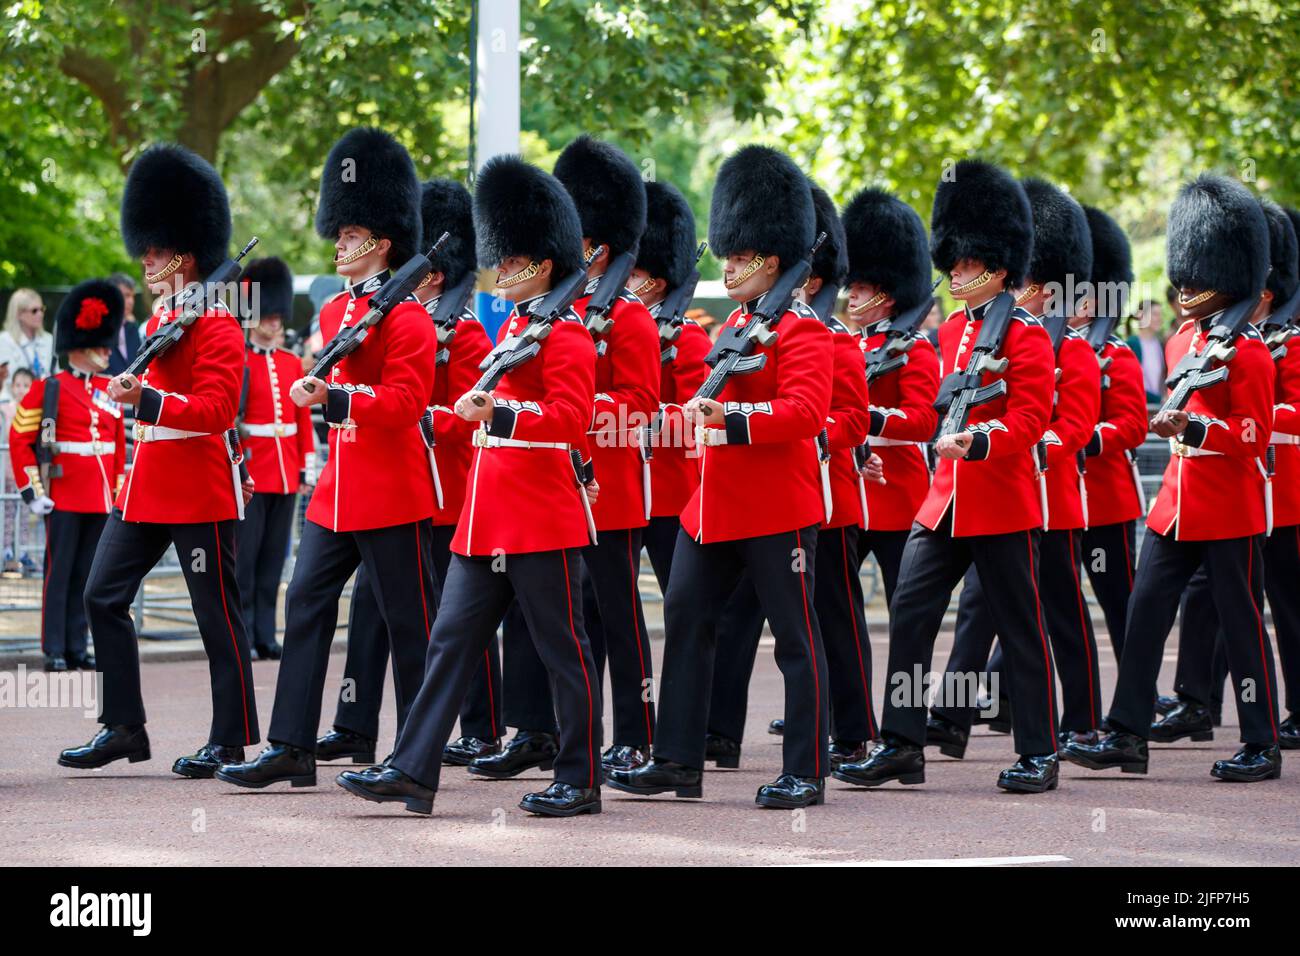 Scots Guards at Trooping the Colour, Colonel’s Review in The Mall, London, England, United Kingdom on Saturday, May 28, 2022. Stock Photo